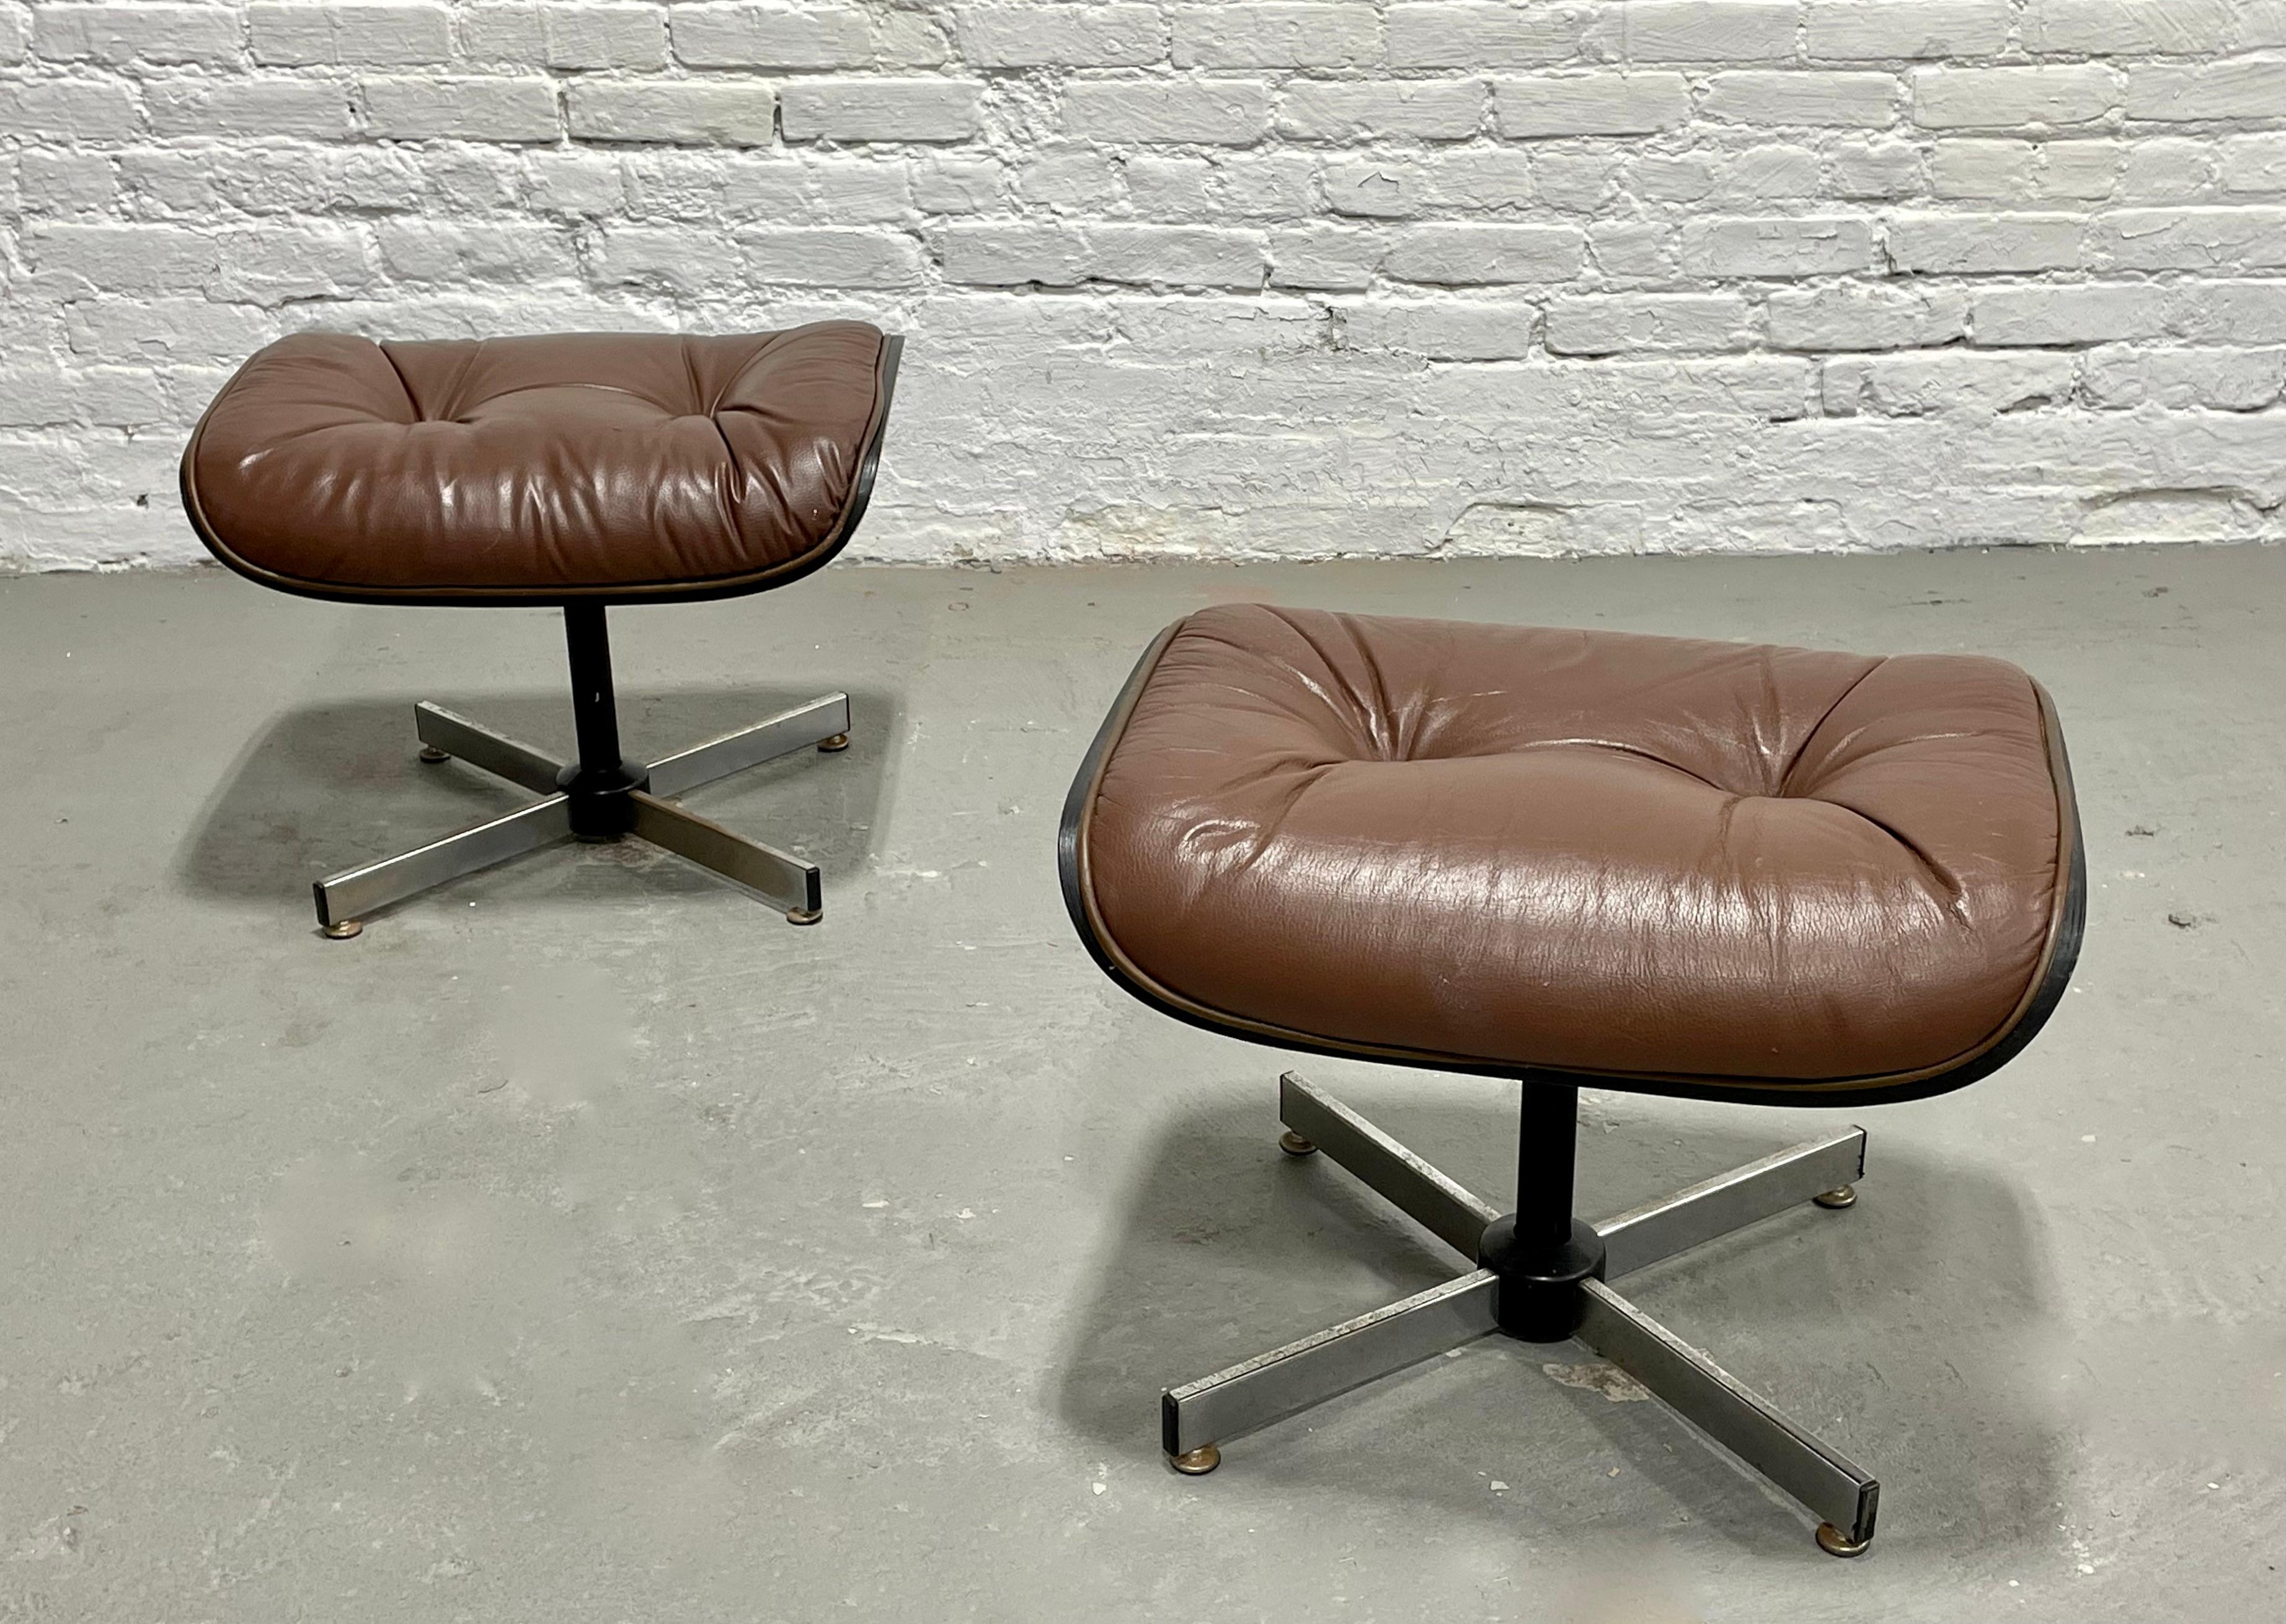 Mid Century Modern Brown tufted ottomans / footstools, a pair. This is perfect if you have an Eames style lounge chair and need a matching ottoman. Each ottoman is perfectly tufted with just some light wear from age and use. Would also work well at